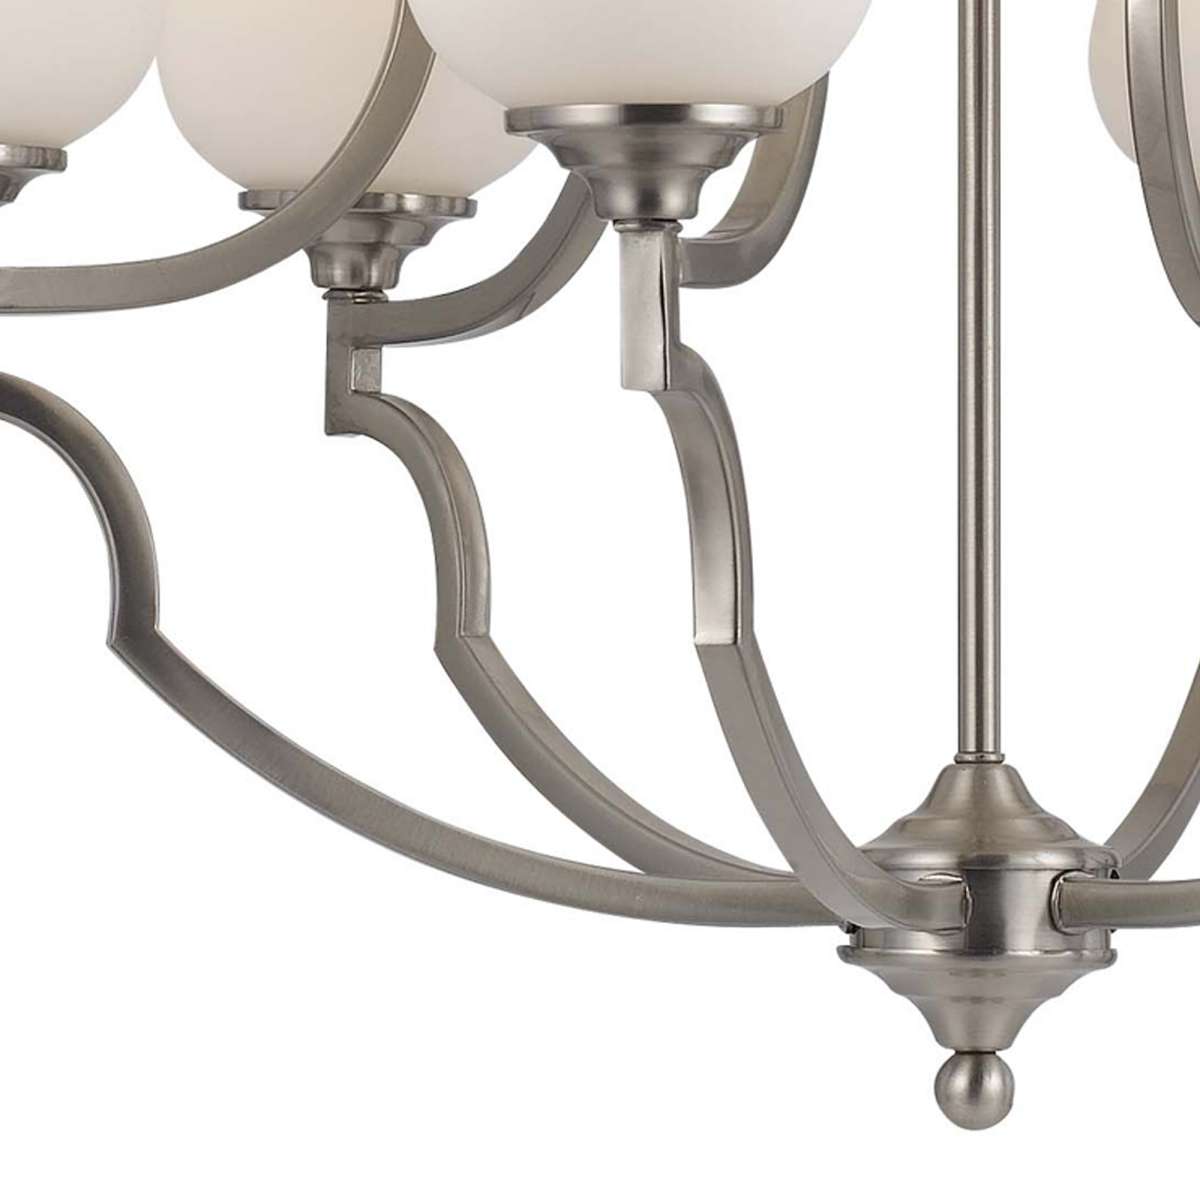 6 Bulb Uplight Chandelier With Metal Frame And Glass Shades,Silver And White By Benzara